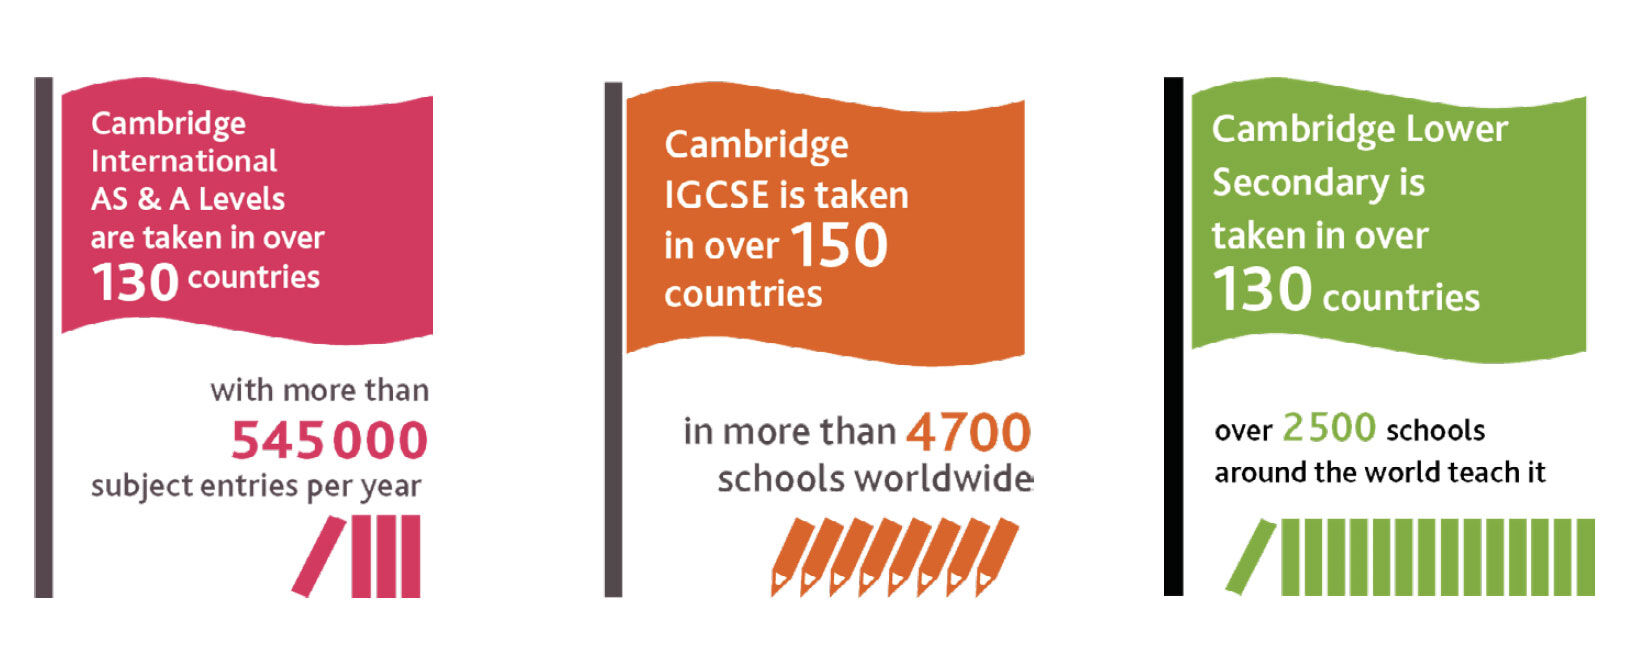 infographic illustrating the benefits of the Cambridge International system